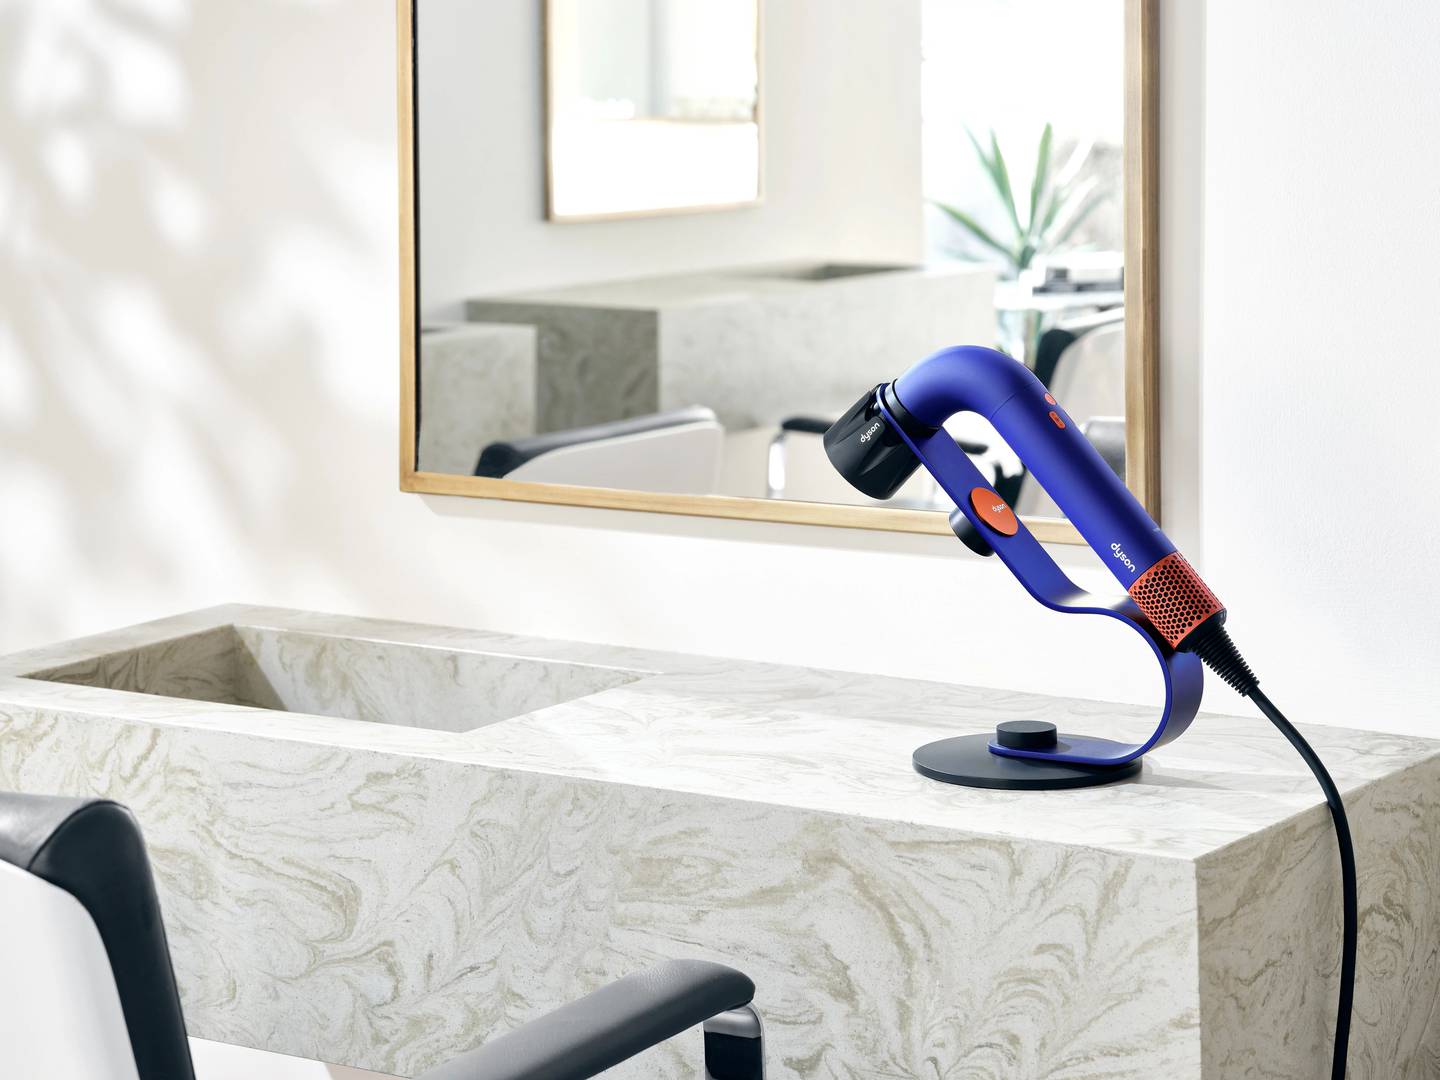 A Dyson hairdryer.